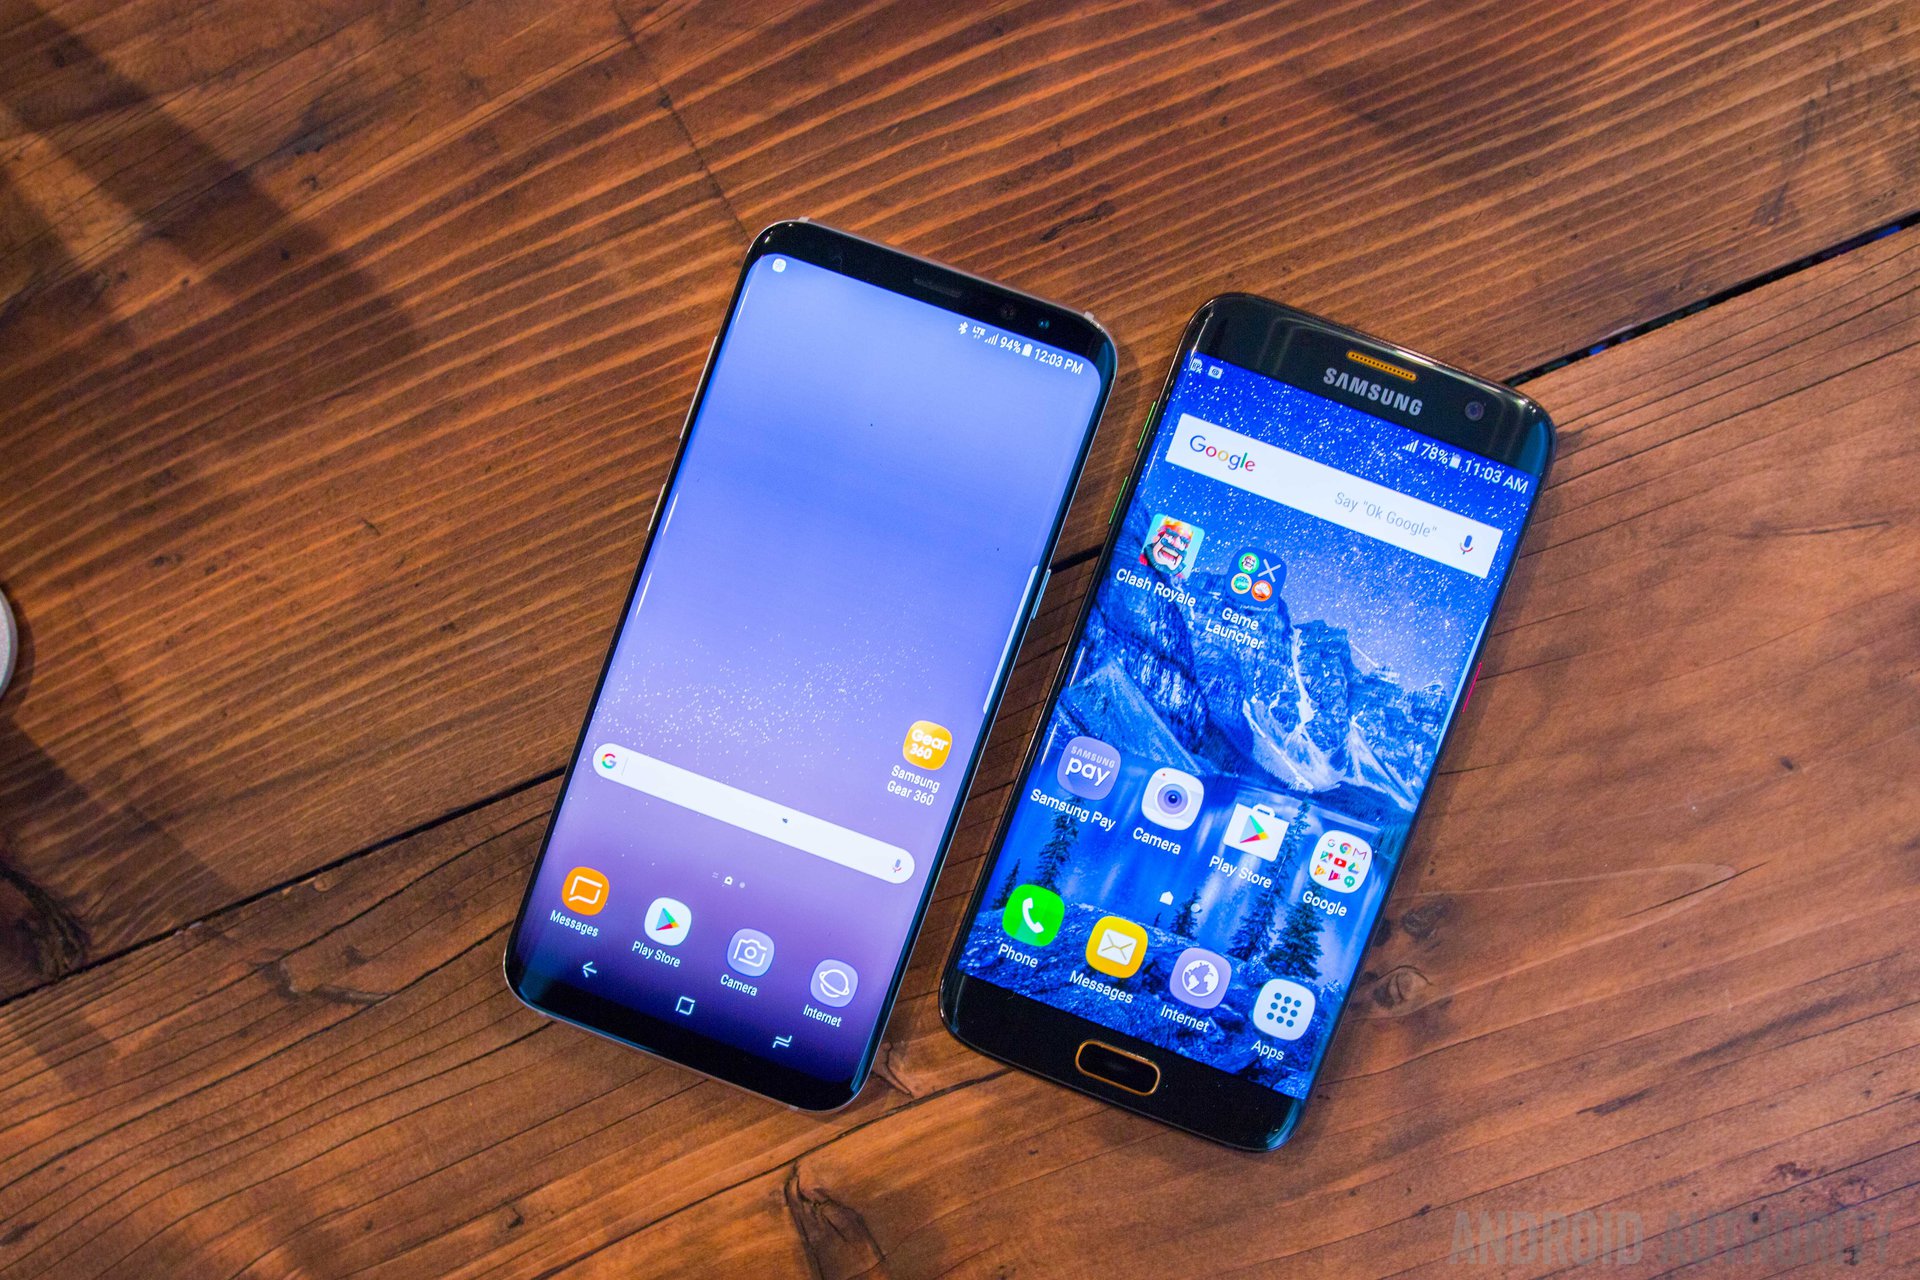 Galaxy S8 vs Galaxy S7 How is the generation gap? - Android Authority